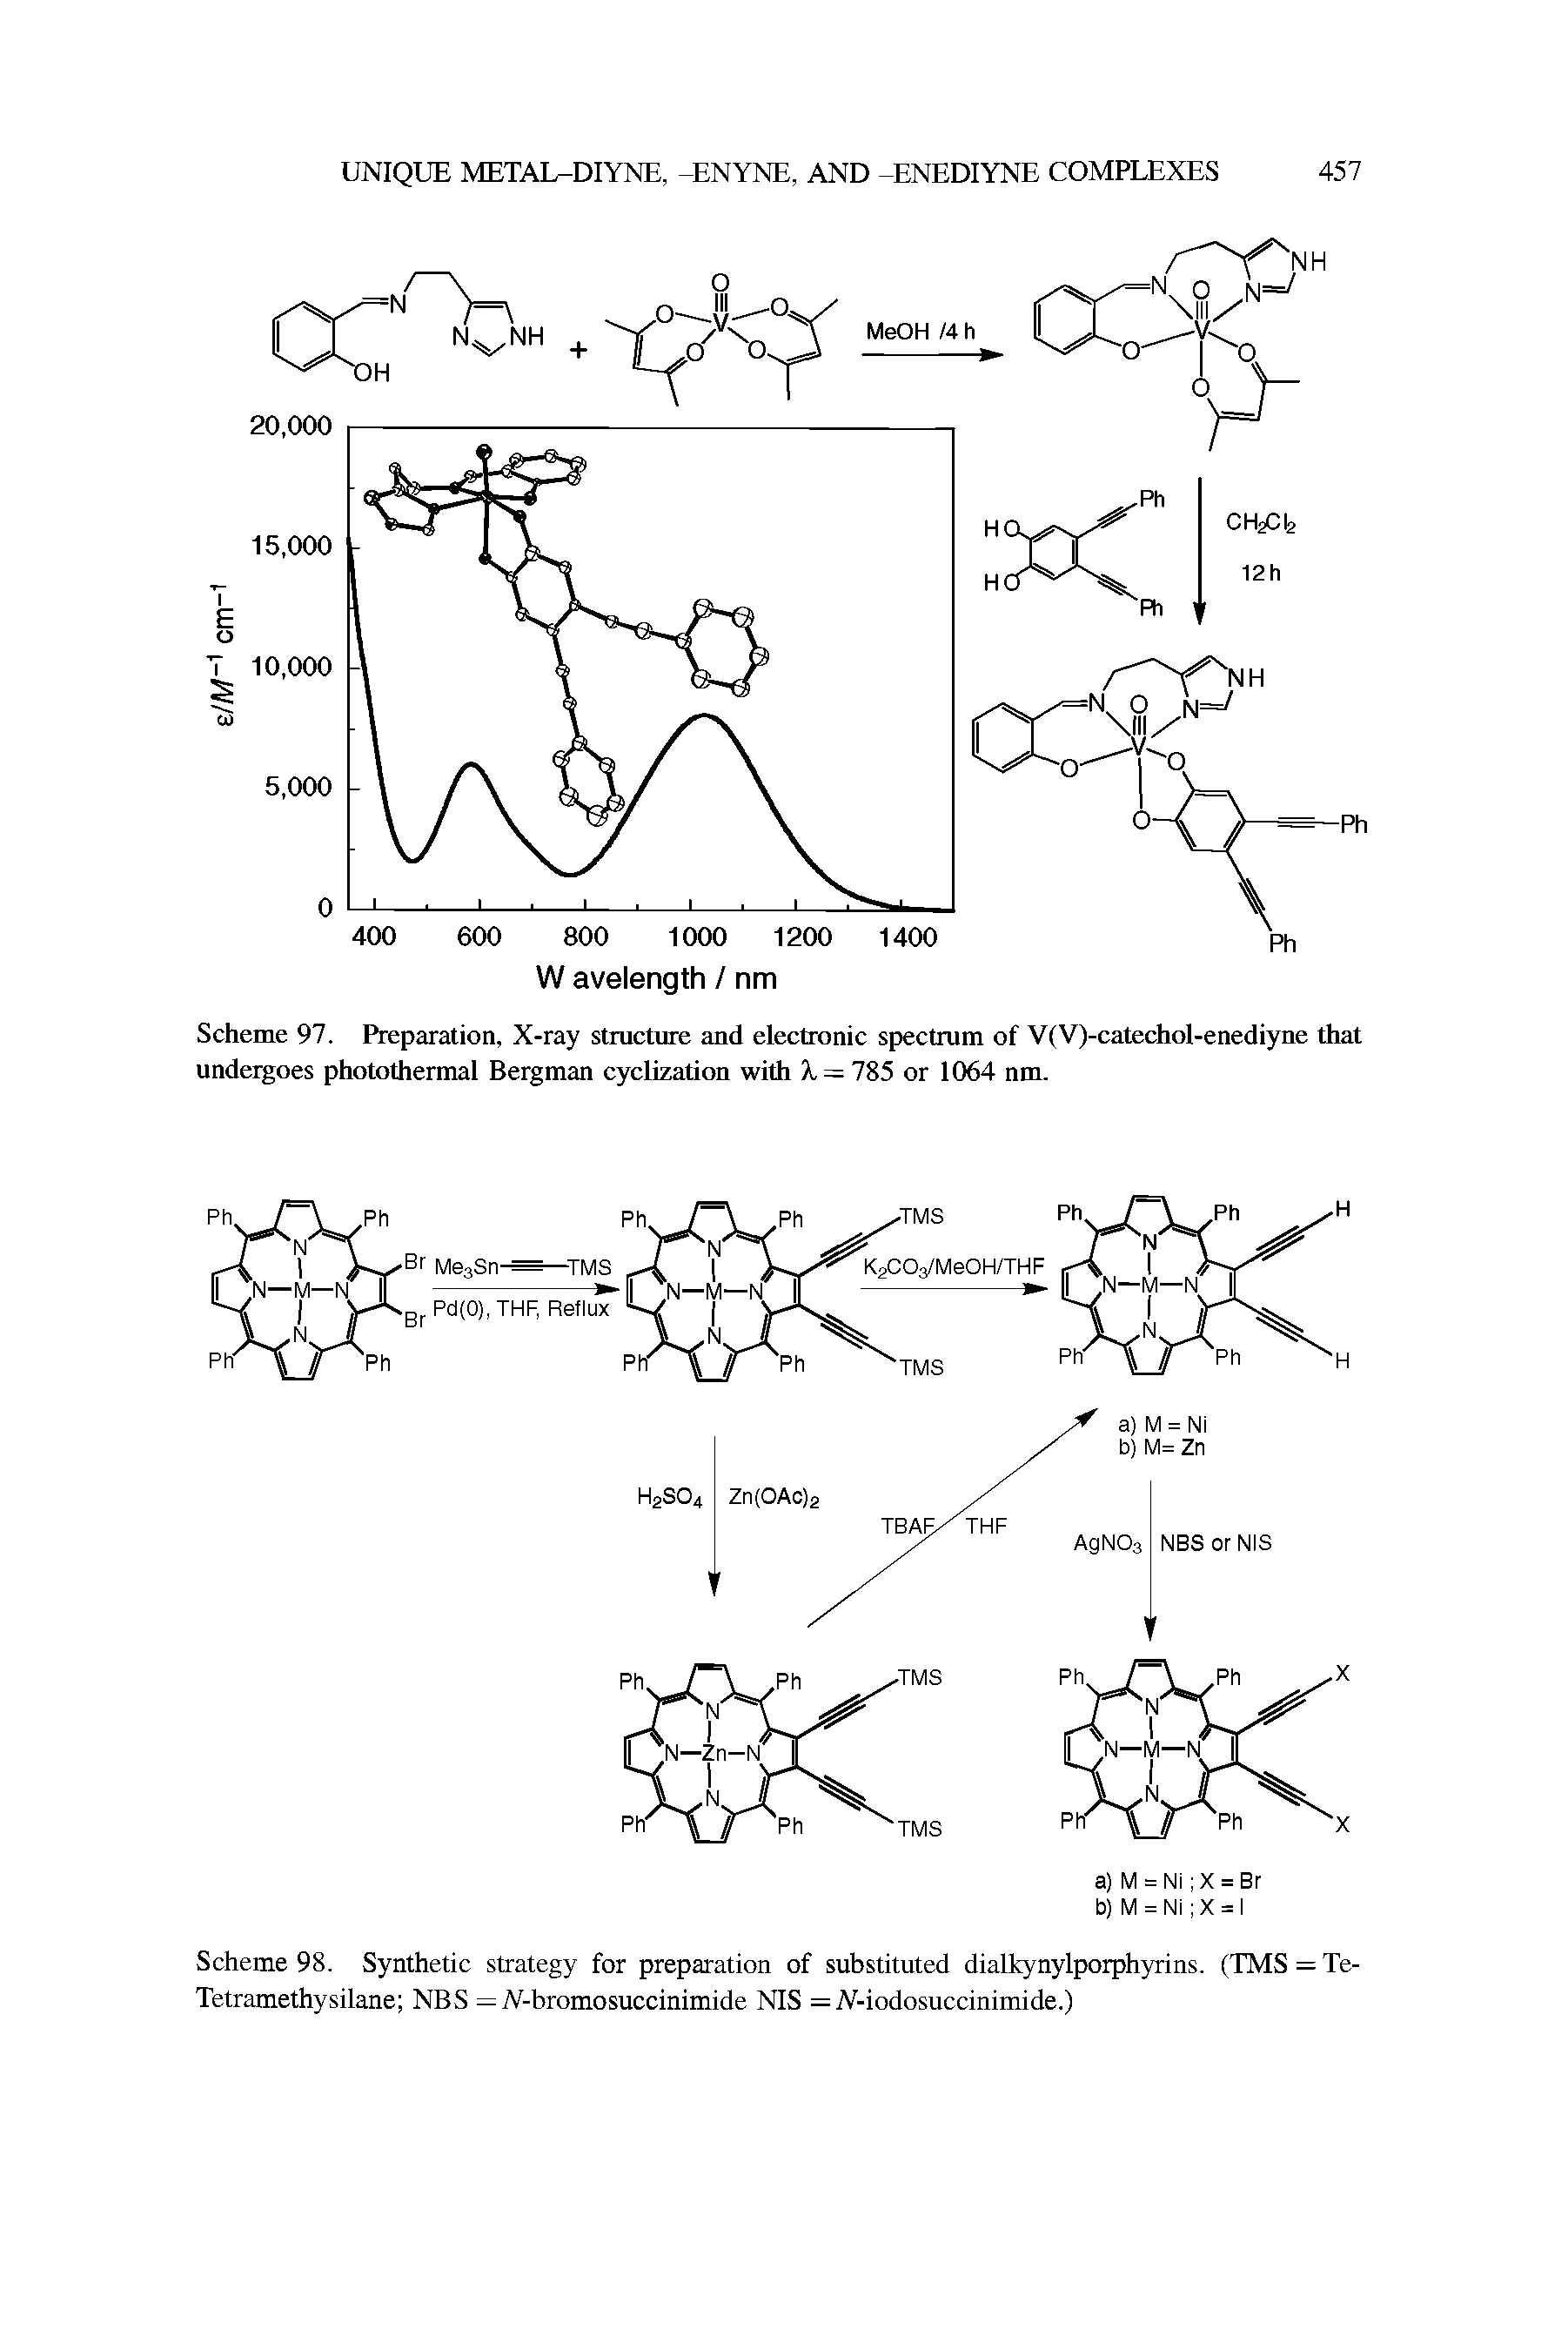 Scheme 98. Synthetic strategy for preparation of substituted dialkynylporphyrins. (TMS = Te-Tetramethysilane NBS = N-bromosuccinimide NIS = JV-iodosuccinimide.)...